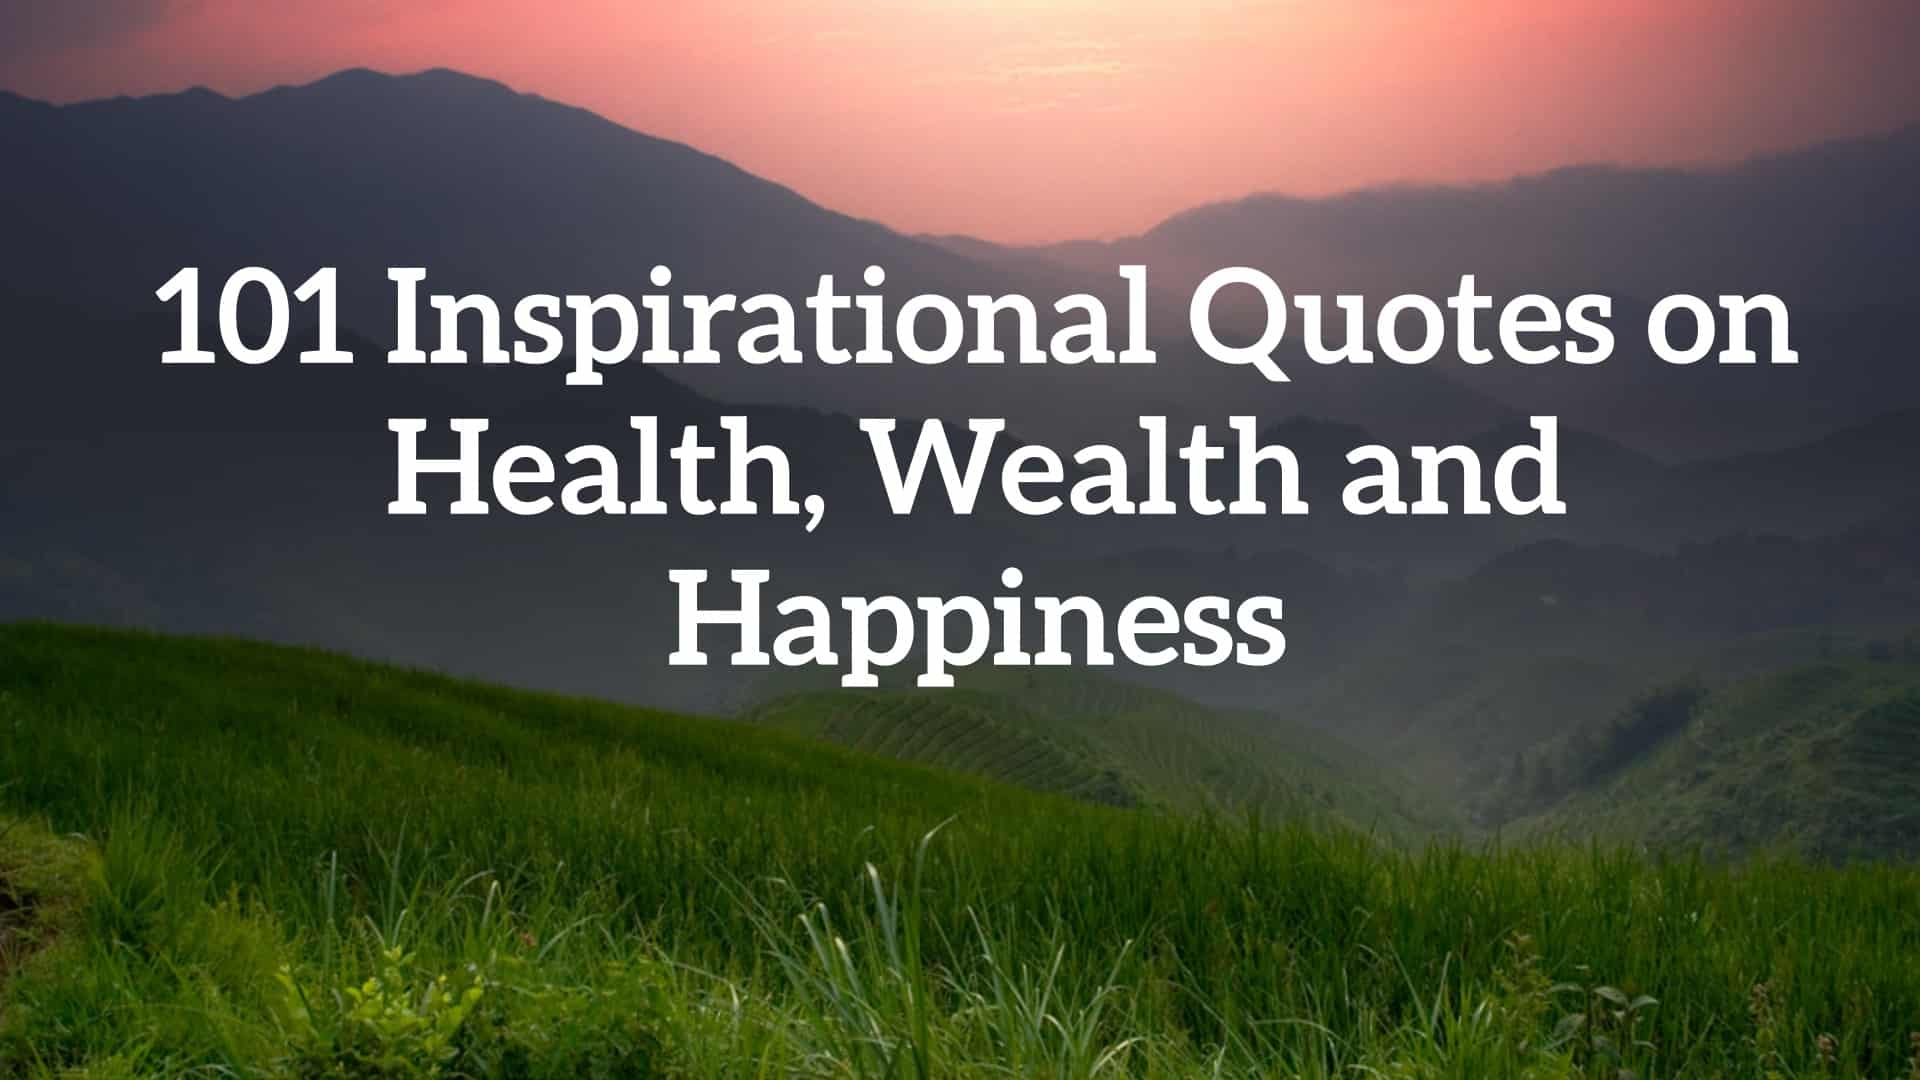 101 Inspirational Quotes on Health, Wealth and Happiness